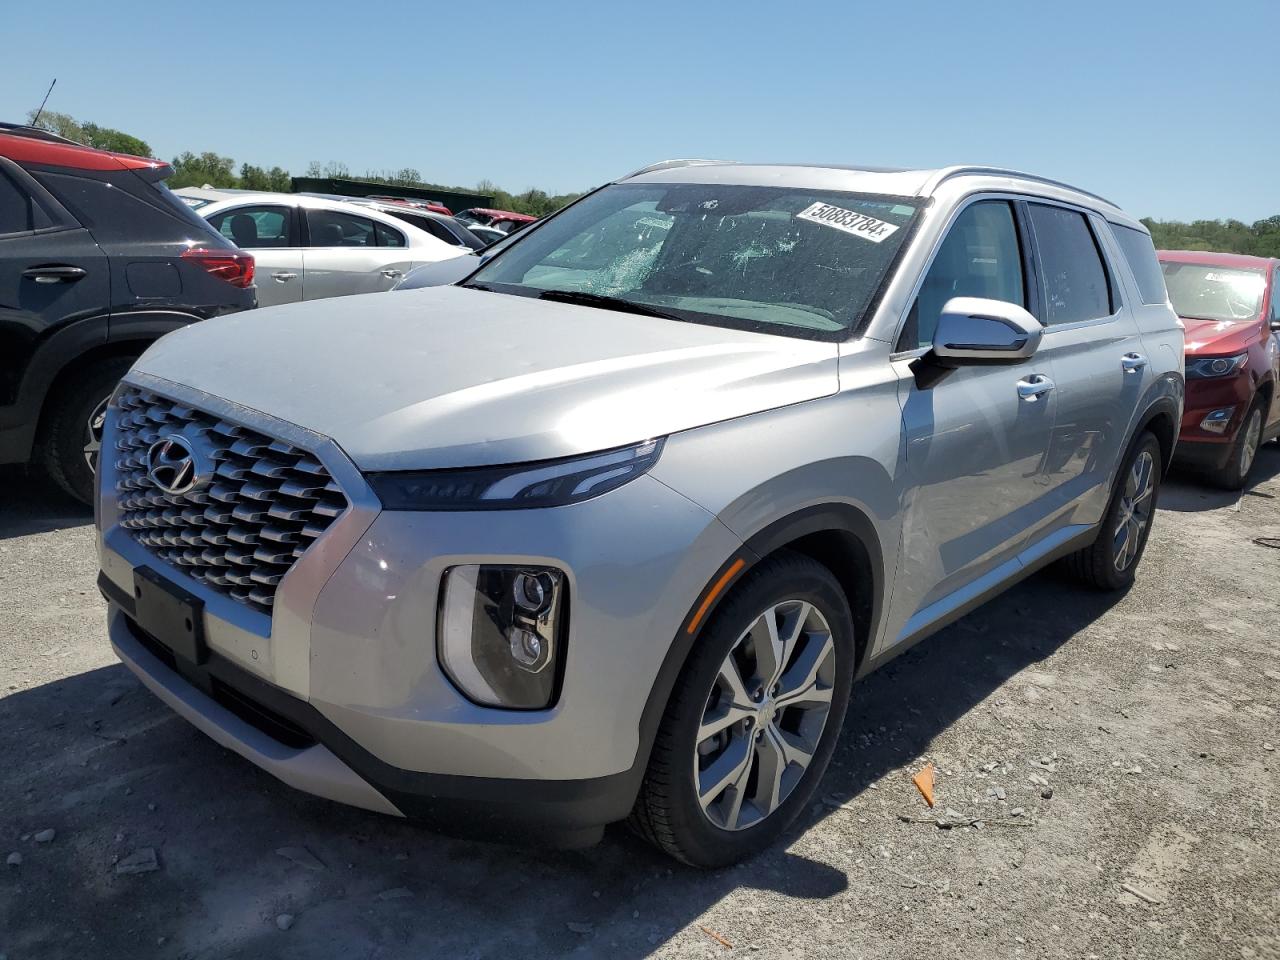 vin: KM8R4DHE6NU355088 KM8R4DHE6NU355088 2022 hyundai palisade 3800 for Sale in 62205 1001, Il - Southern Illinois, Cahokia Heights, Illinois, USA